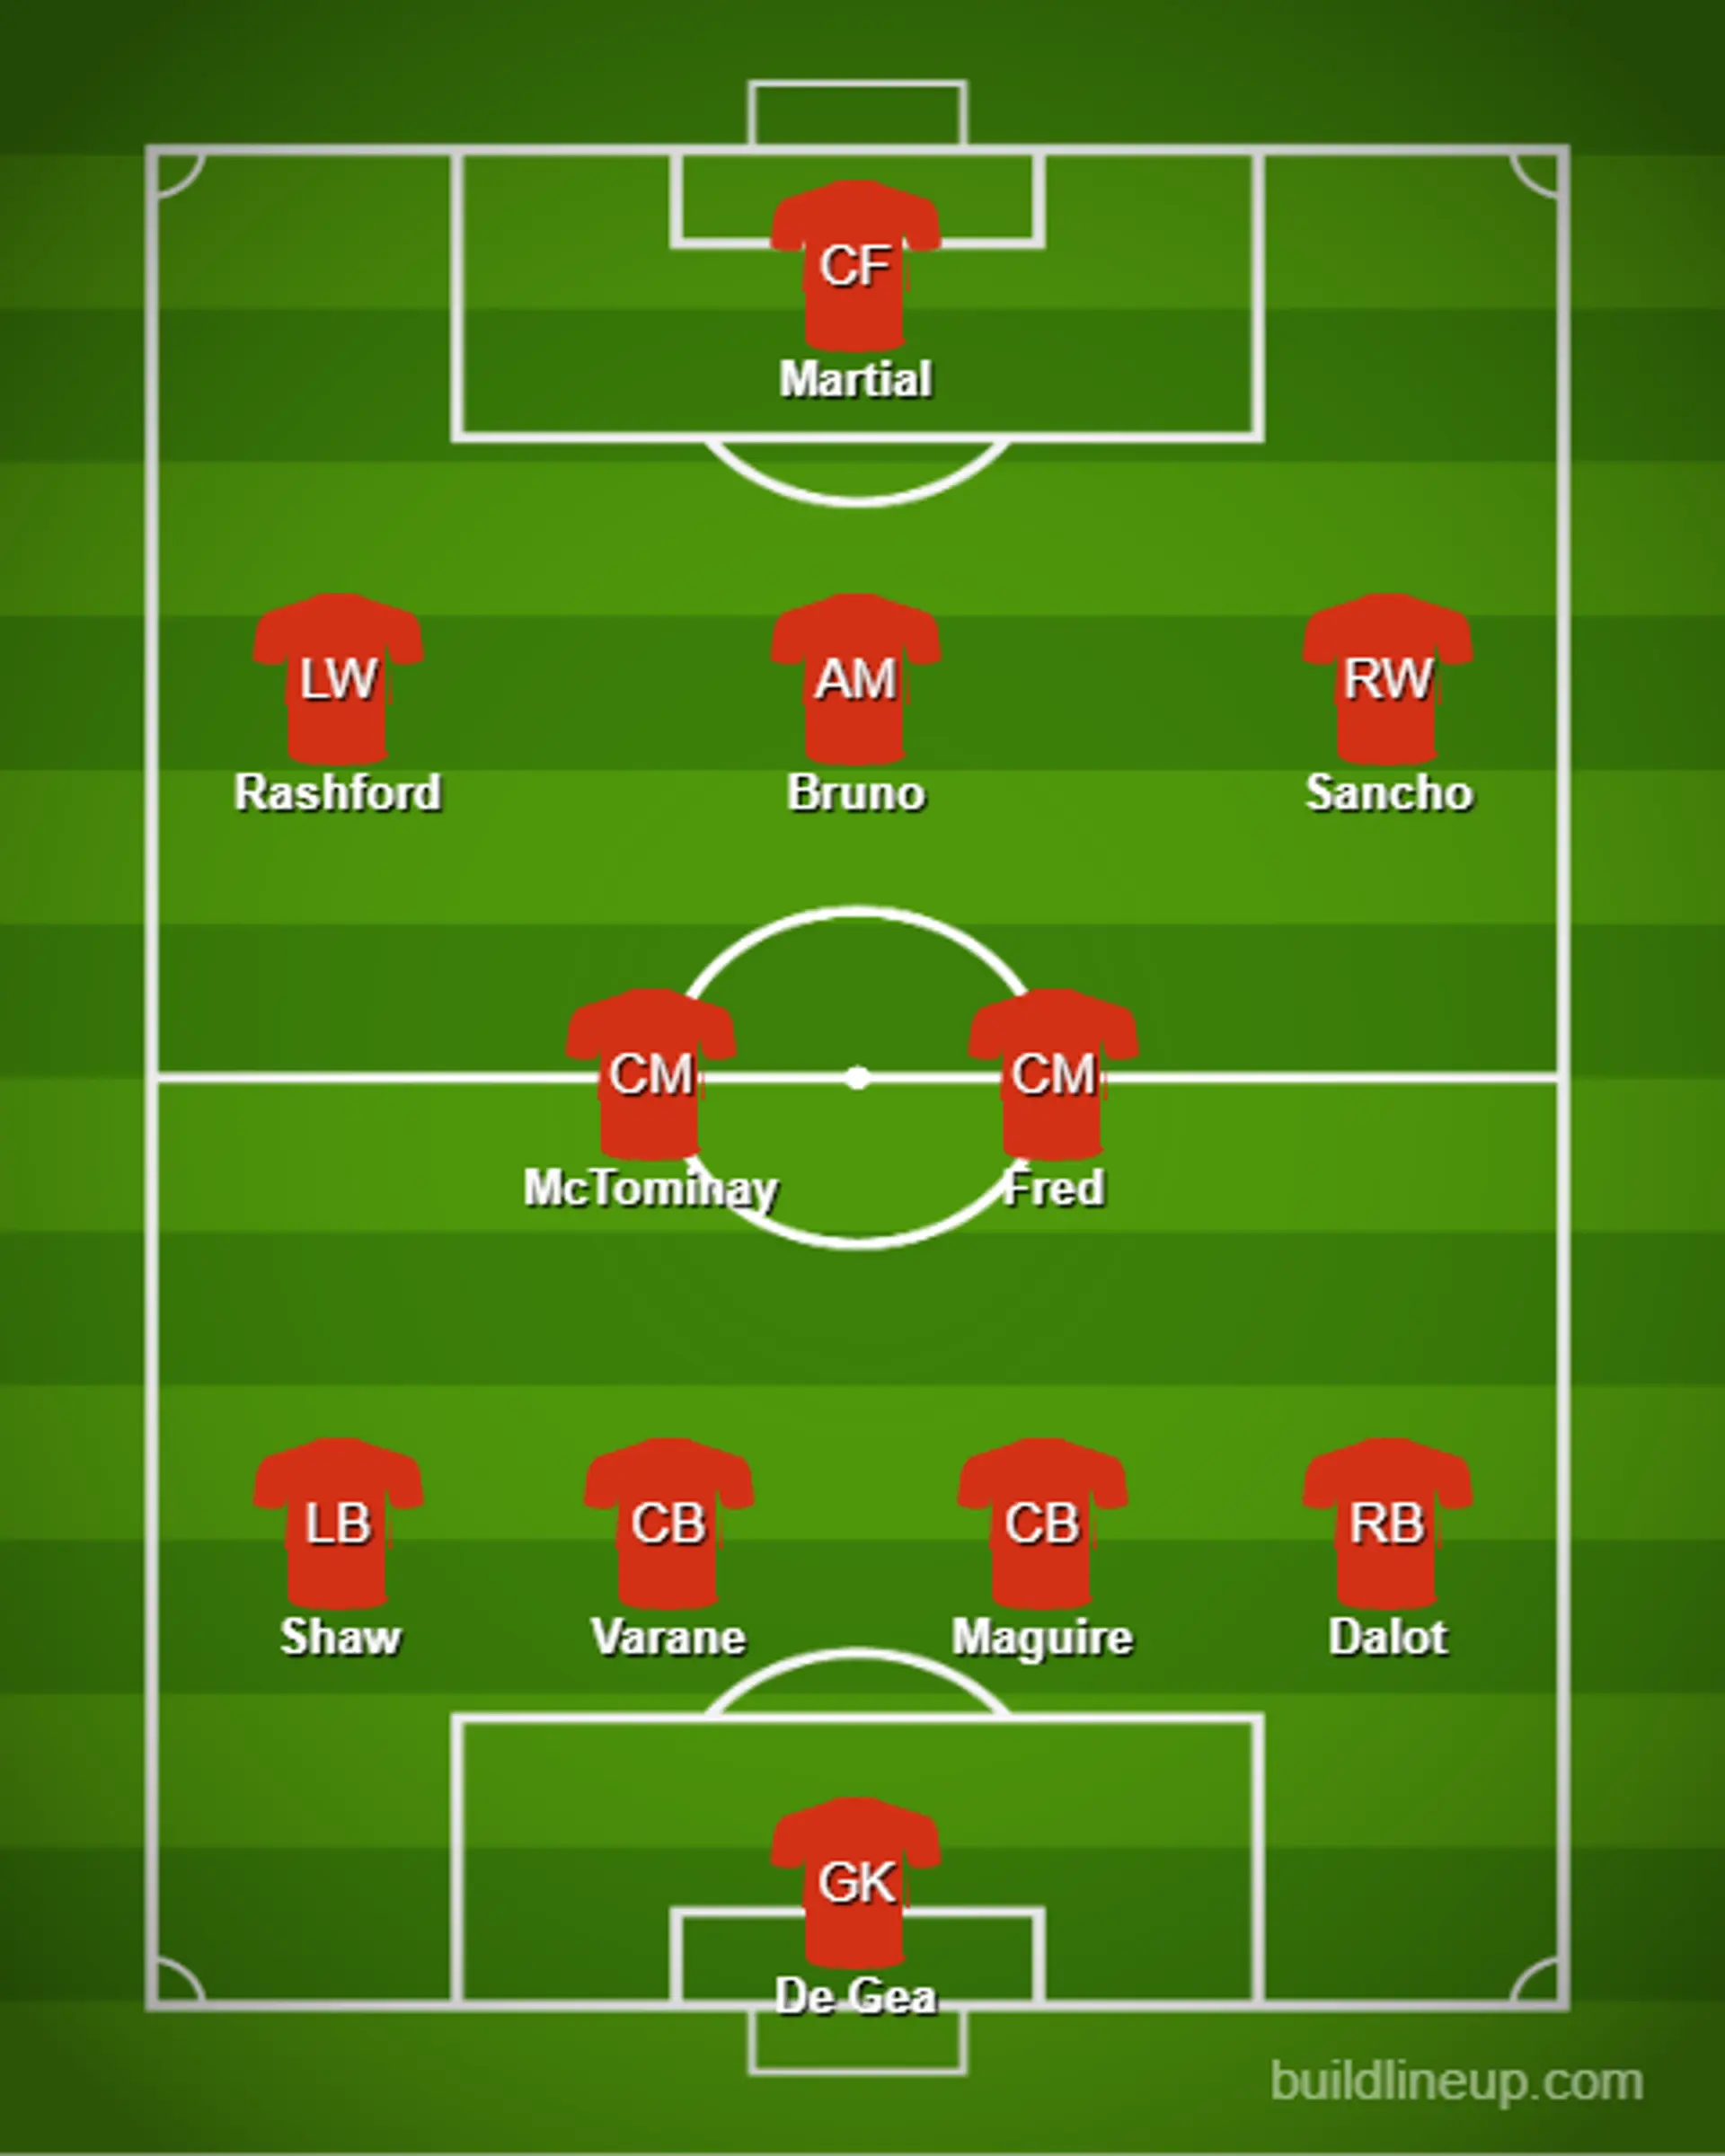 dcaabe14 3670 4b5f 8332 8020bcd16d0f?width=1920&quality=75 Team news for Man United vs Aston Villa friendly clash, probable line-up